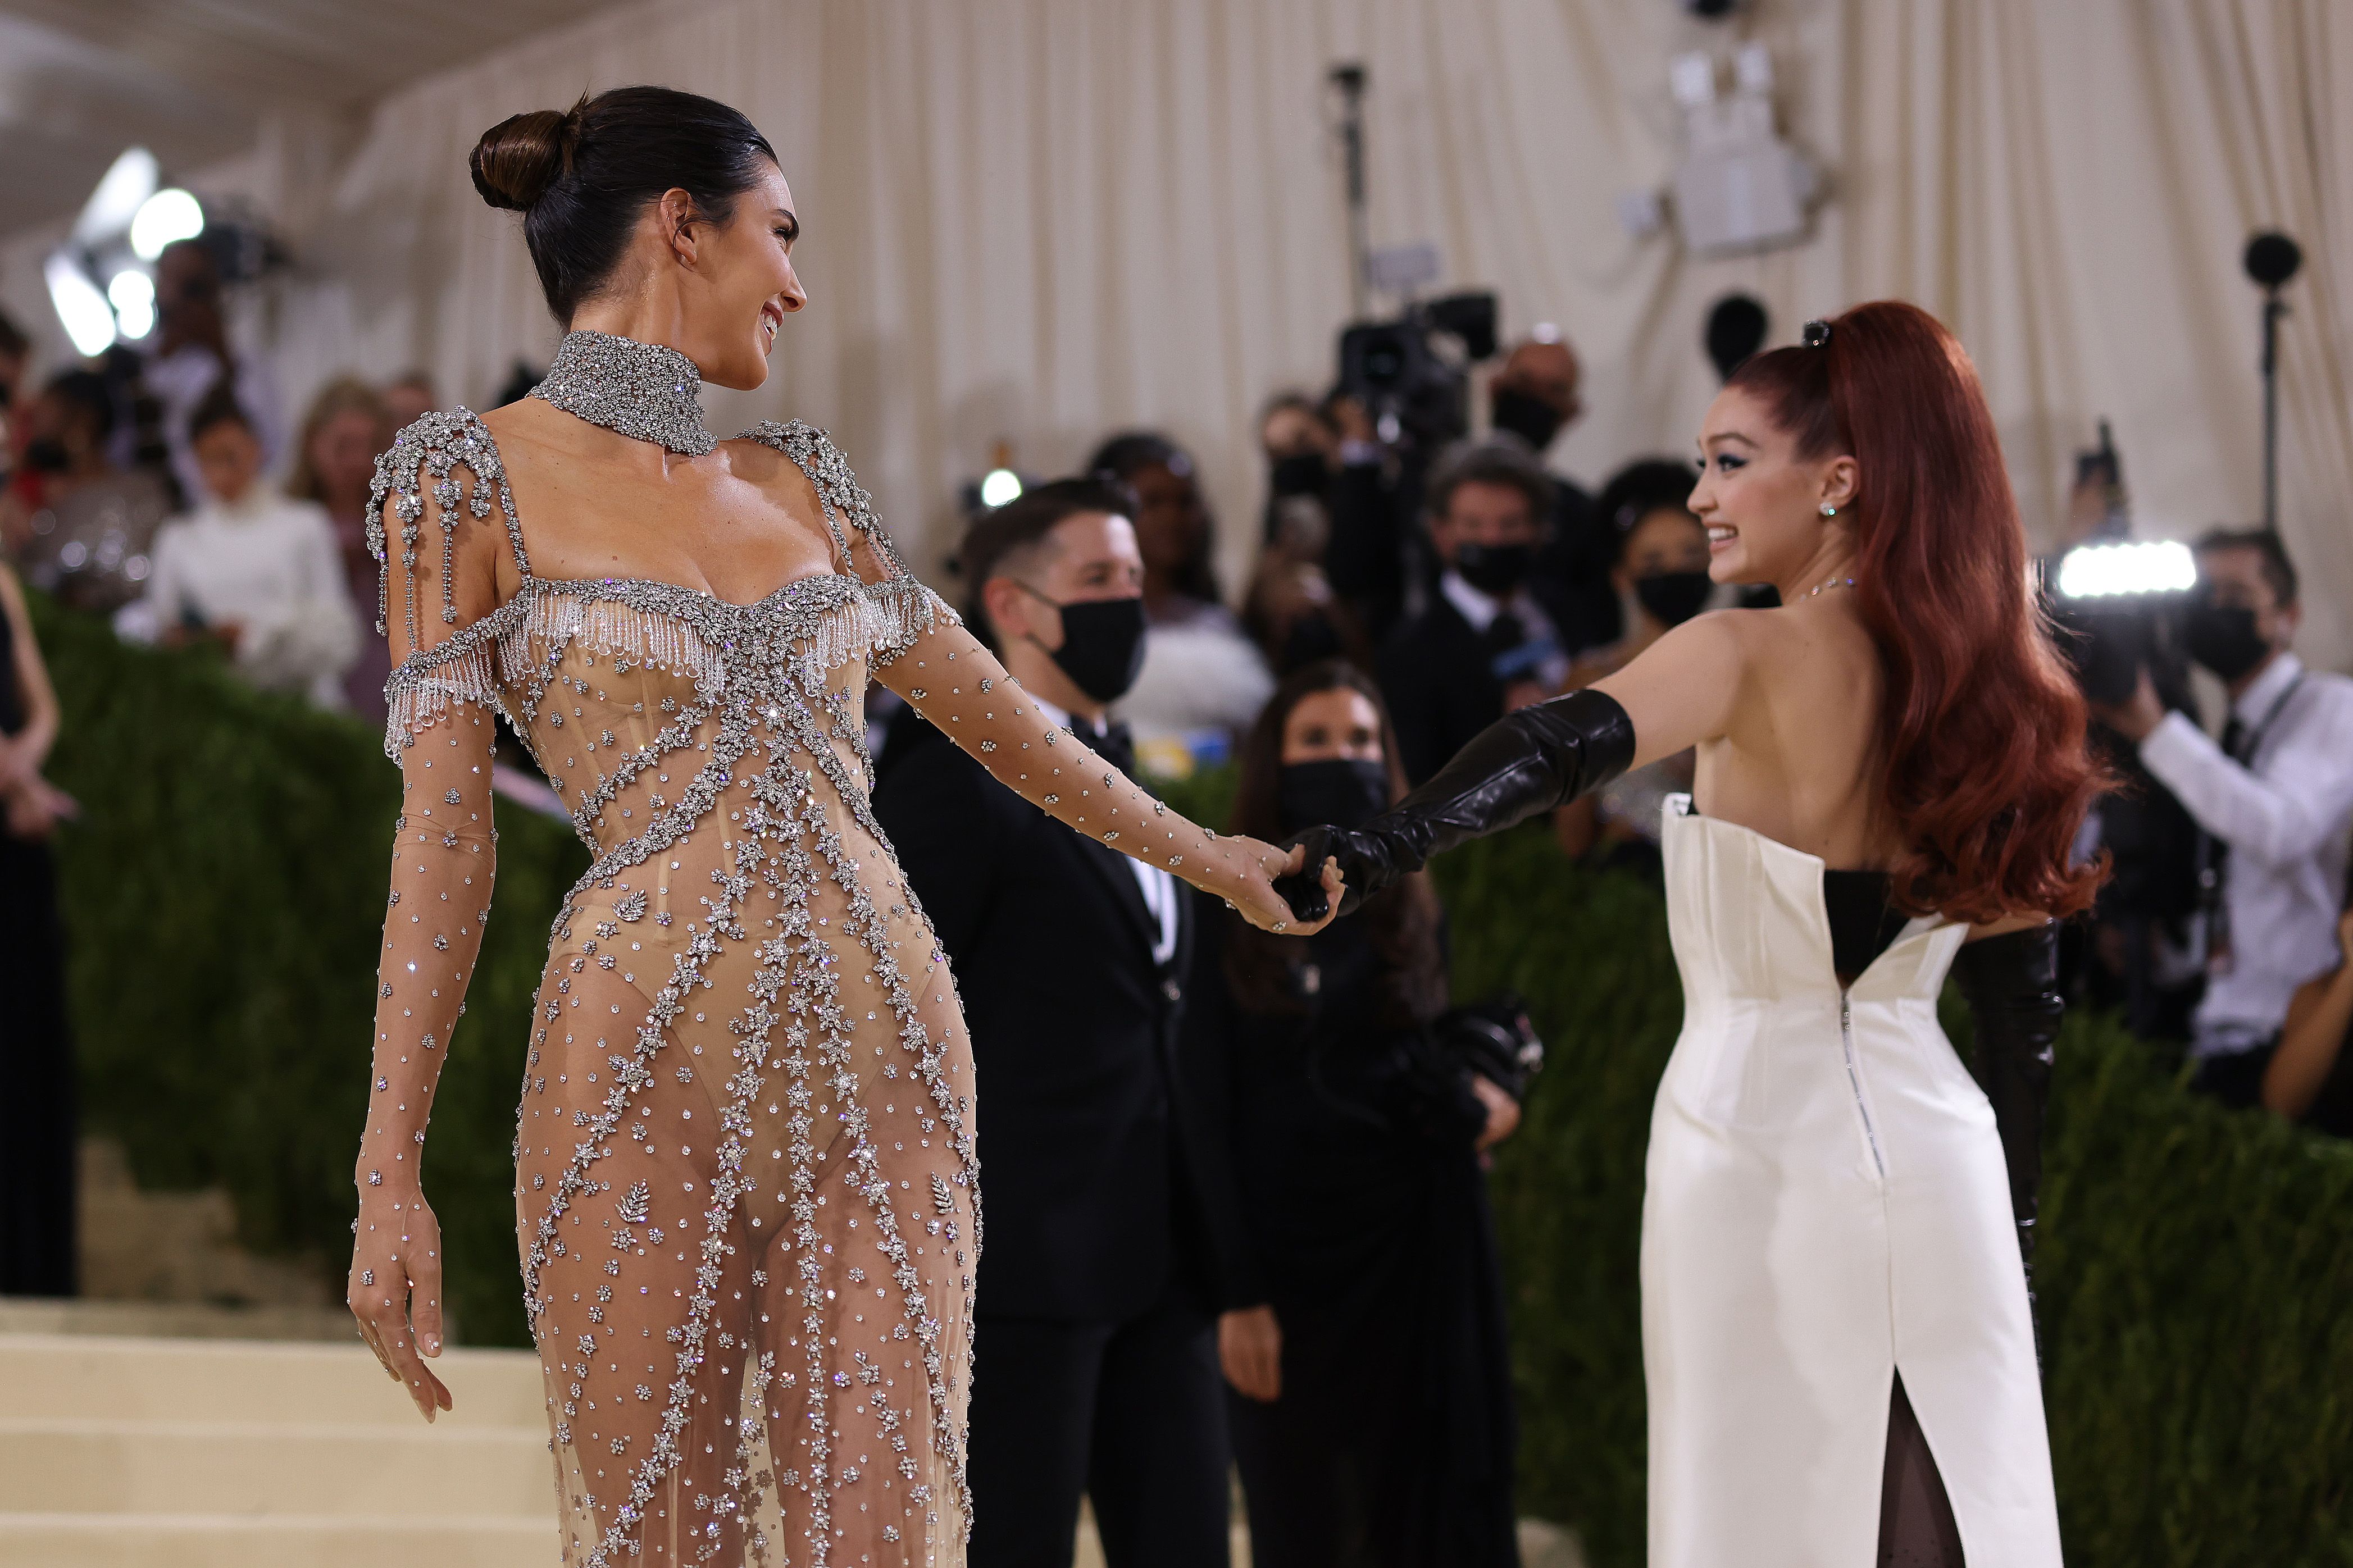 Met Gala Guest List 2023: Who Is Going, Attending This Year? – StyleCaster